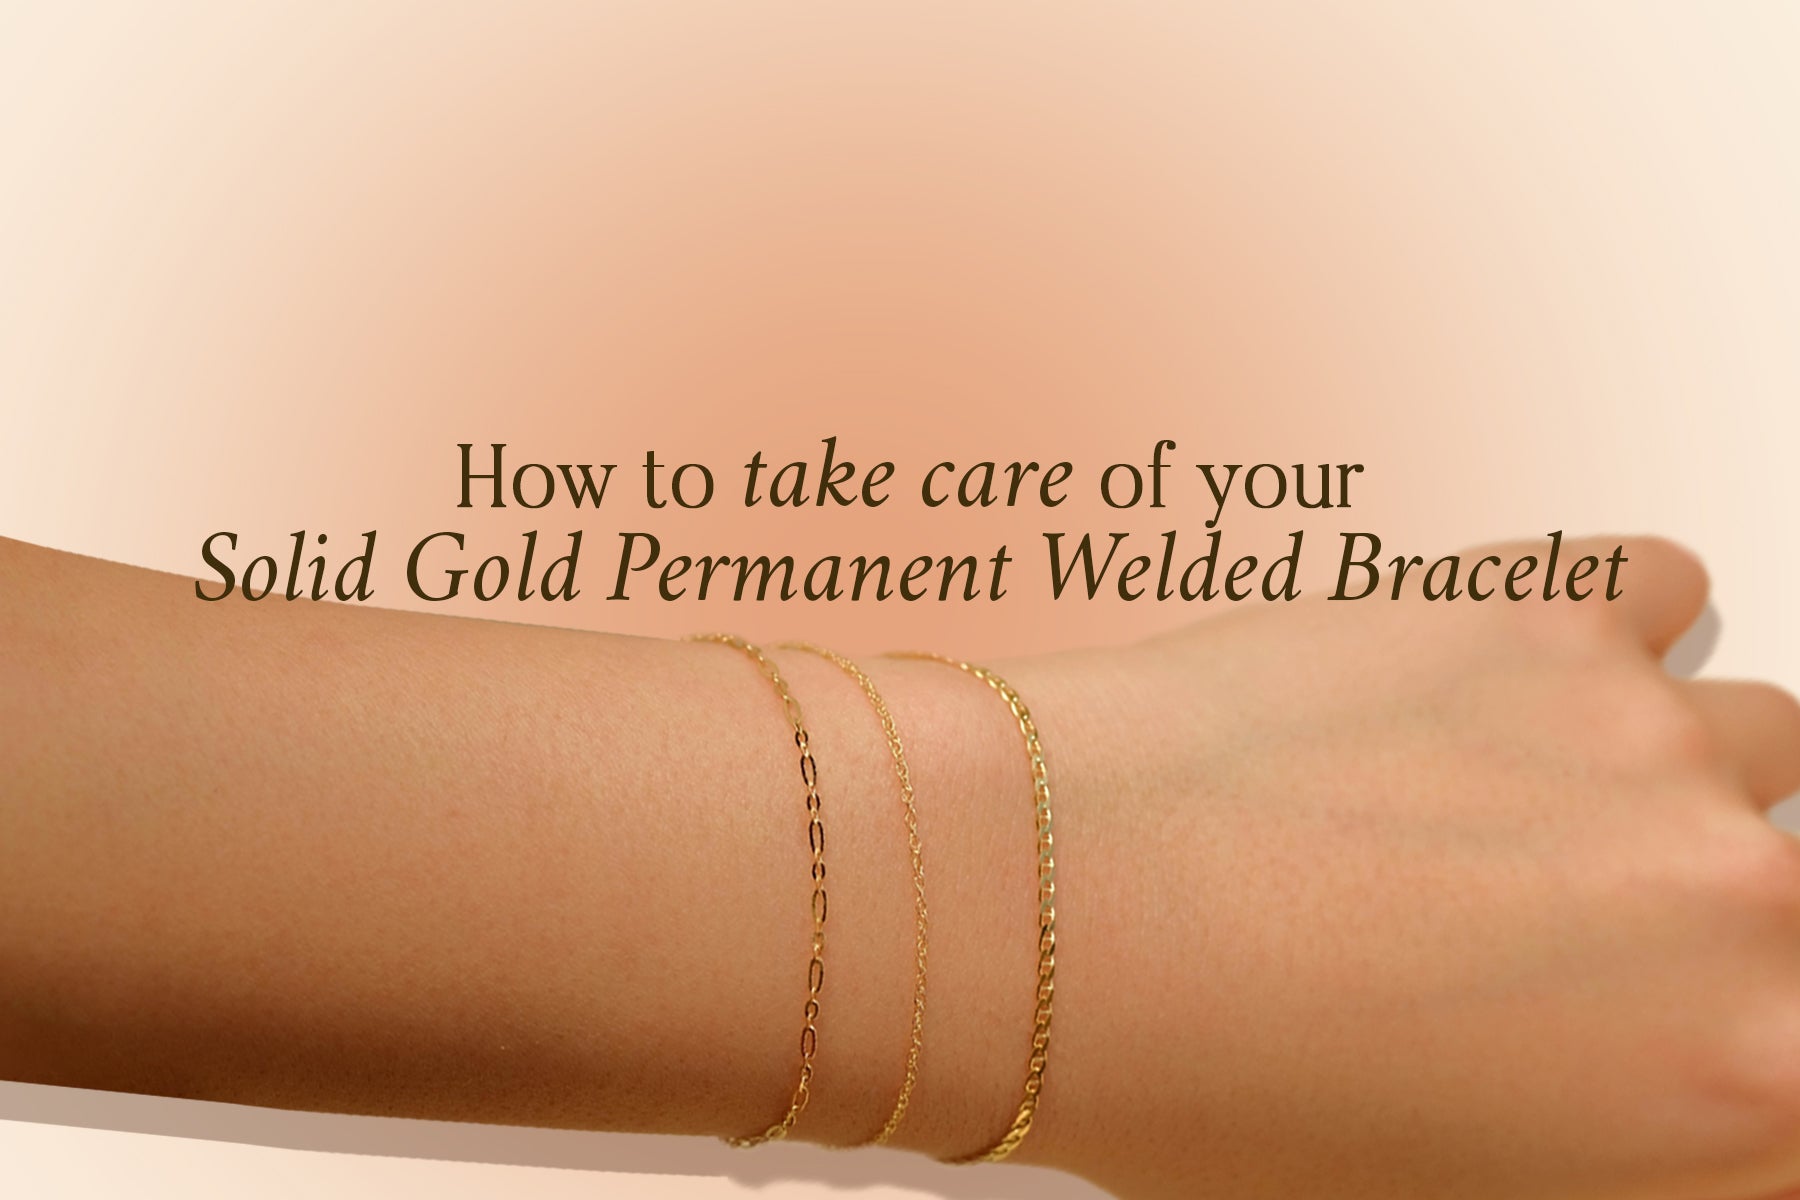 How To Take Care of Your Solid Gold Permanent Welded Bracelet